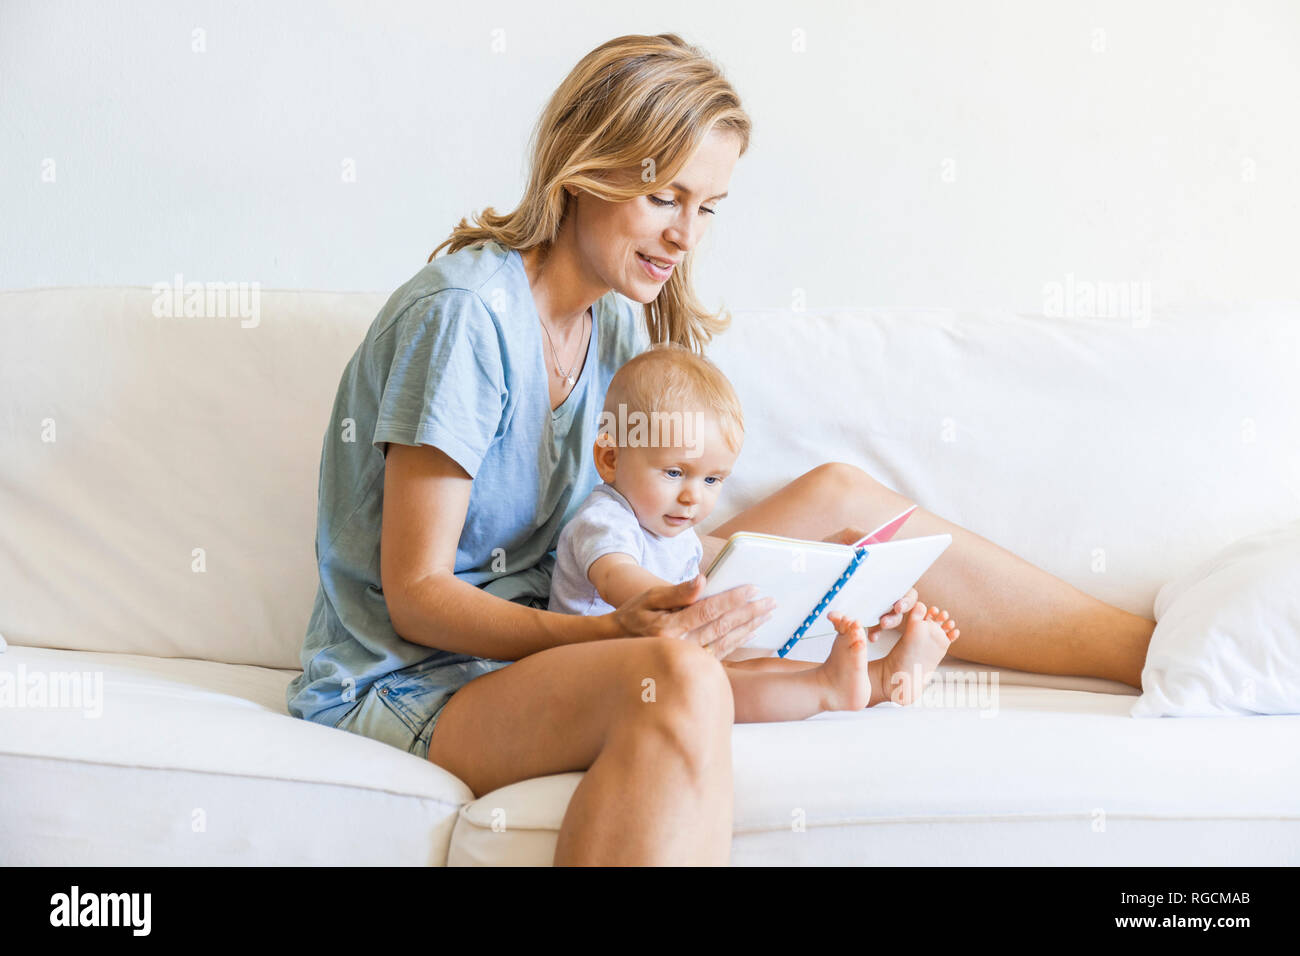 Mother and baby girl sitting on couch looking at picture book Stock Photo